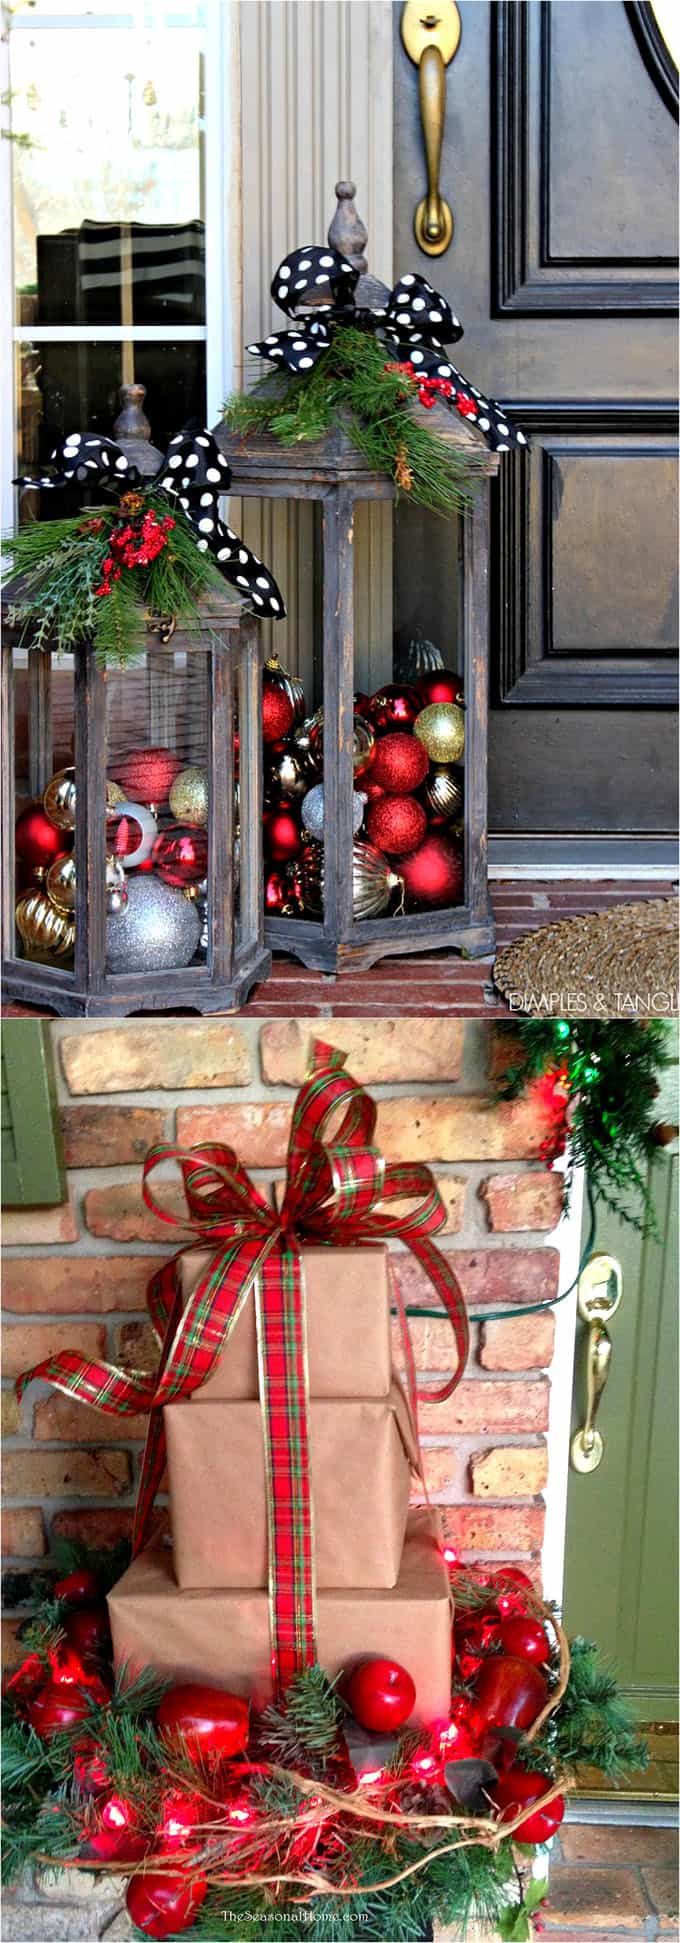 DIY Outdoor Decorating
 Gorgeous Outdoor Christmas Decorations 32 Best Ideas